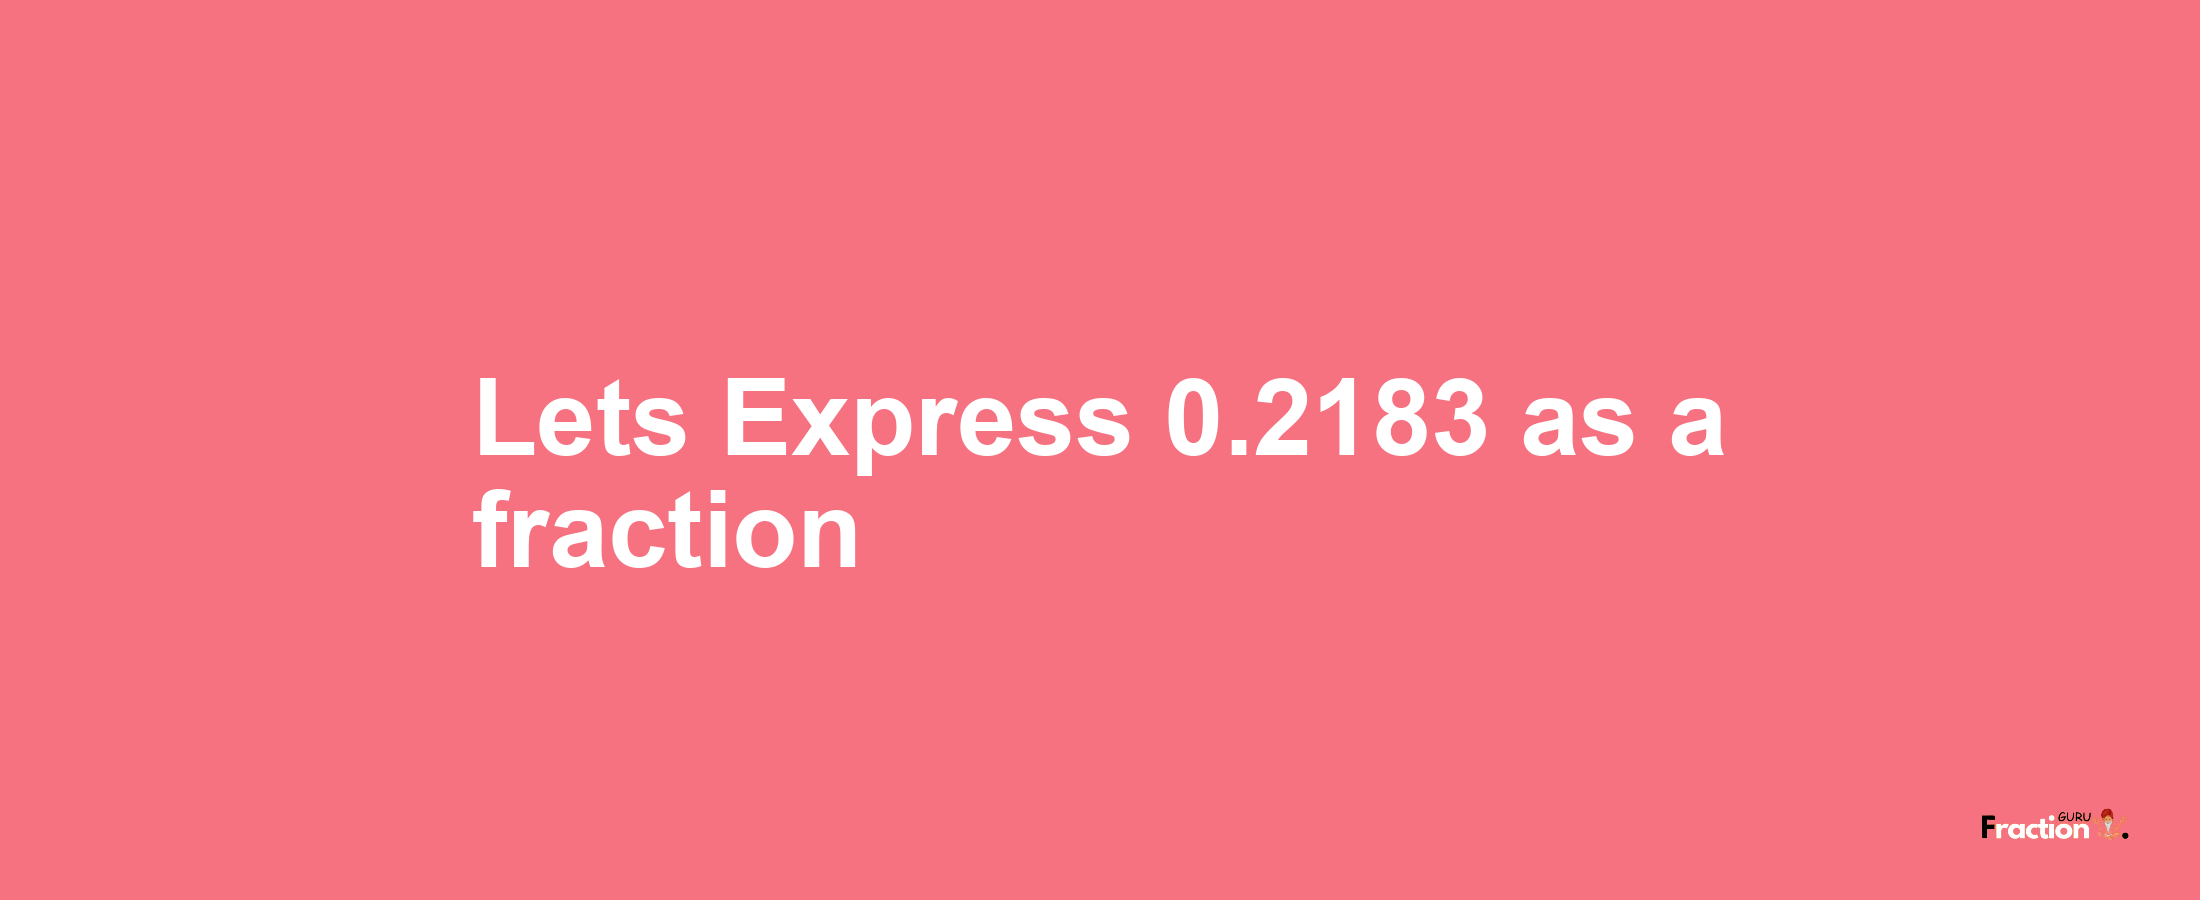 Lets Express 0.2183 as afraction